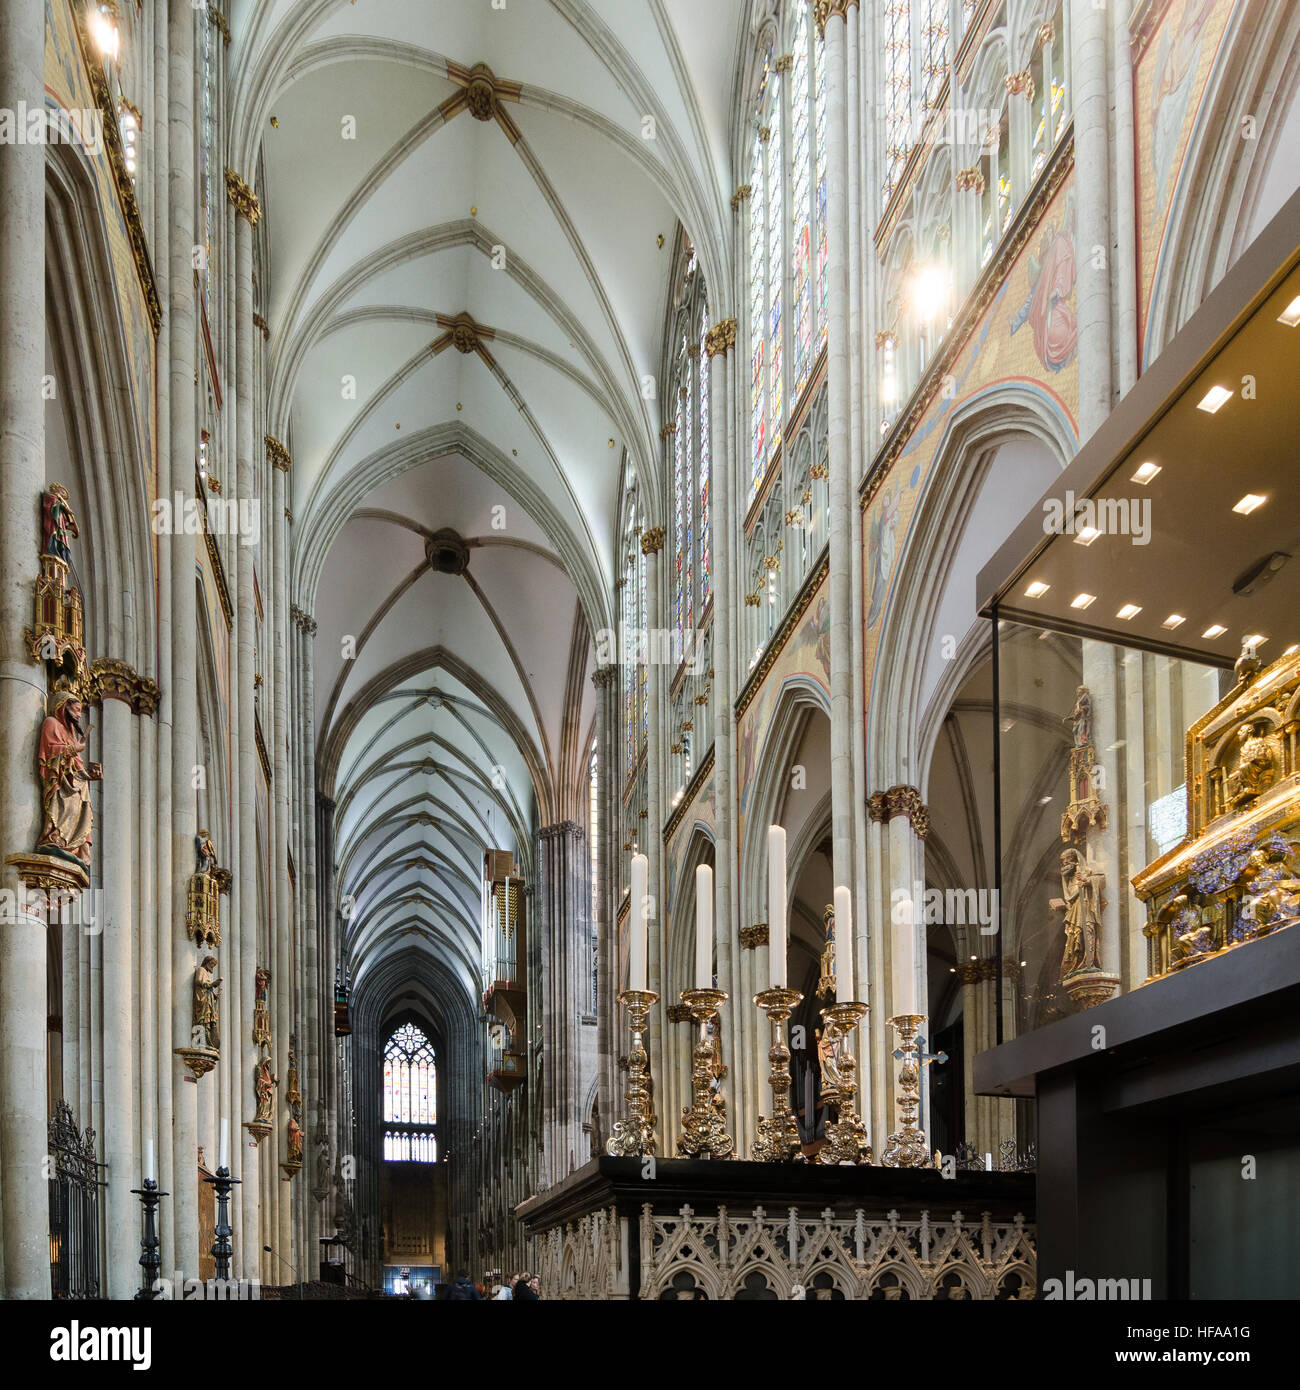 Cologne, Germany - September 17, 2015: Interior of the Cologne Cathedral. Roman Catholic cathedral in gothic style. Nave, ceiling, organ, columns and  Stock Photo